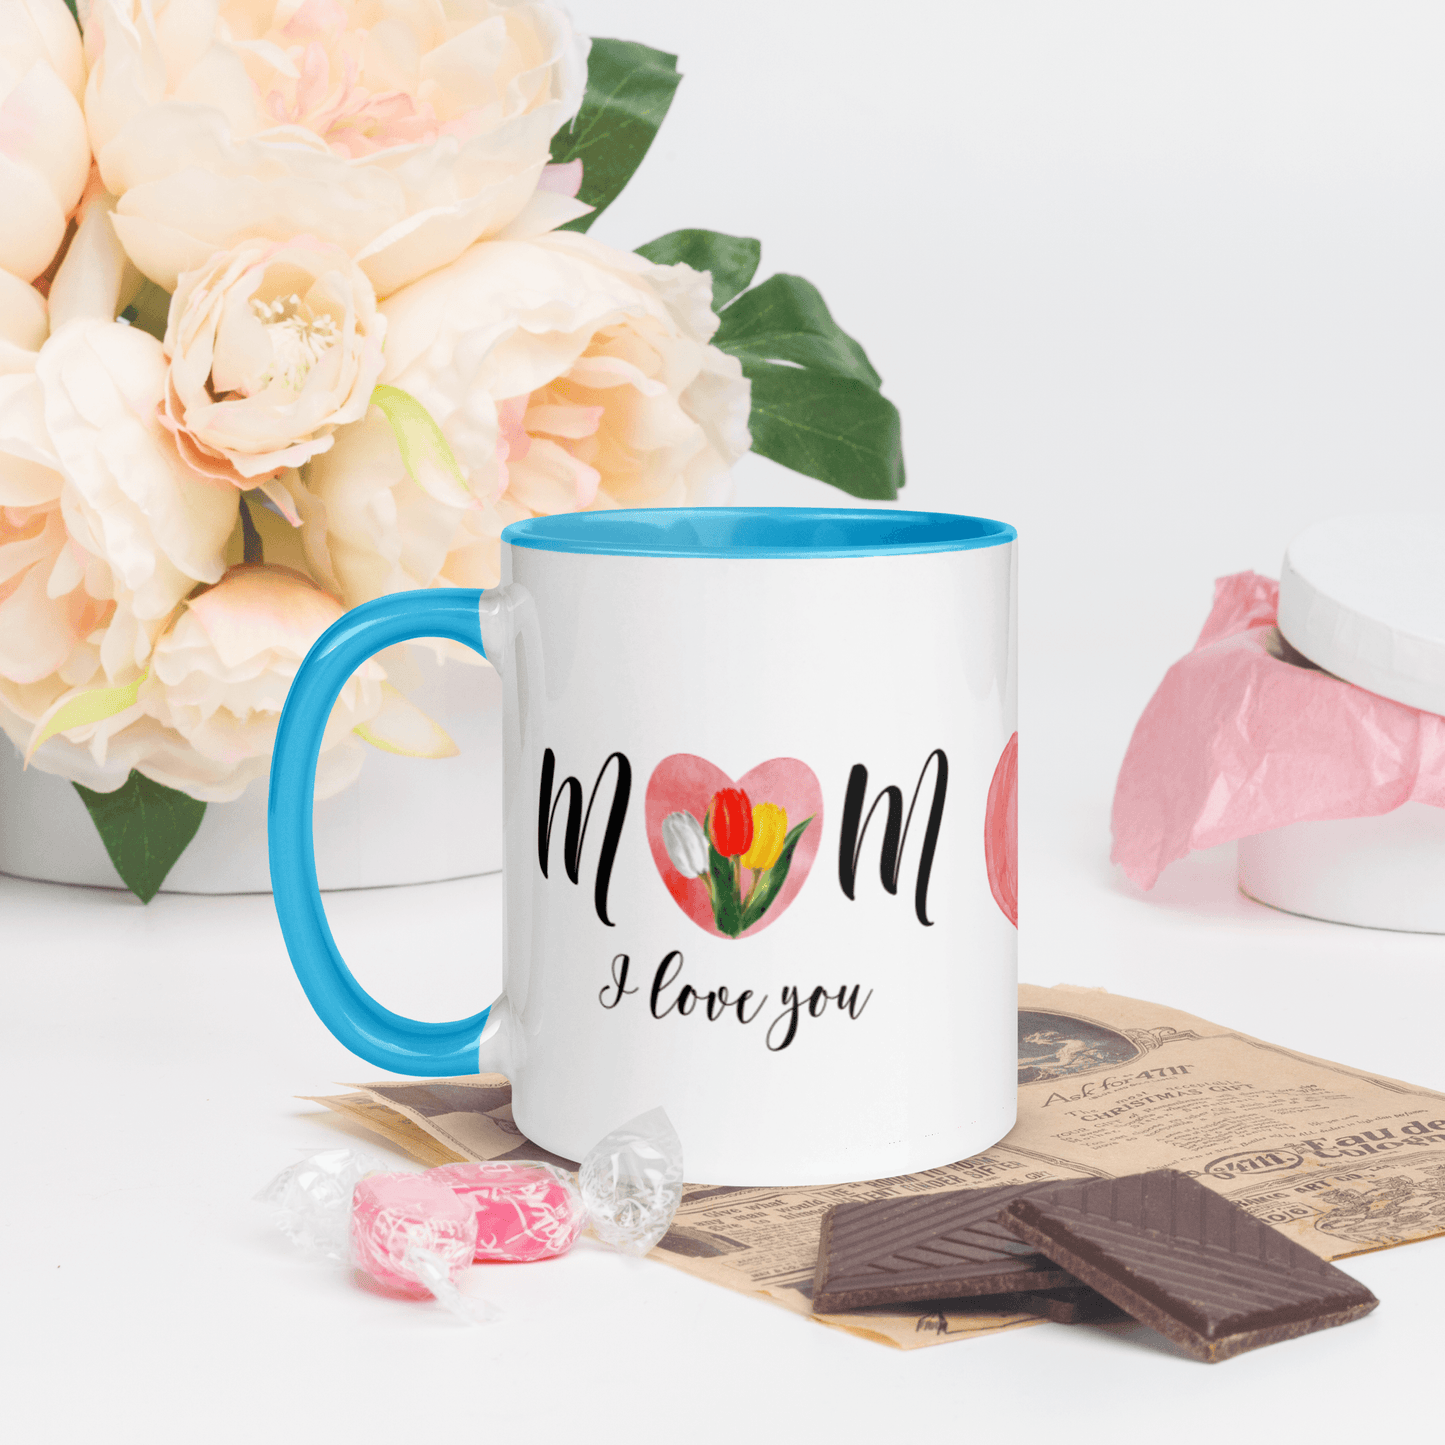 Mom I Love You! ❤️ Ceramic Mug with Color Accent (Available in Various Colors!) - The Grateful Hearts